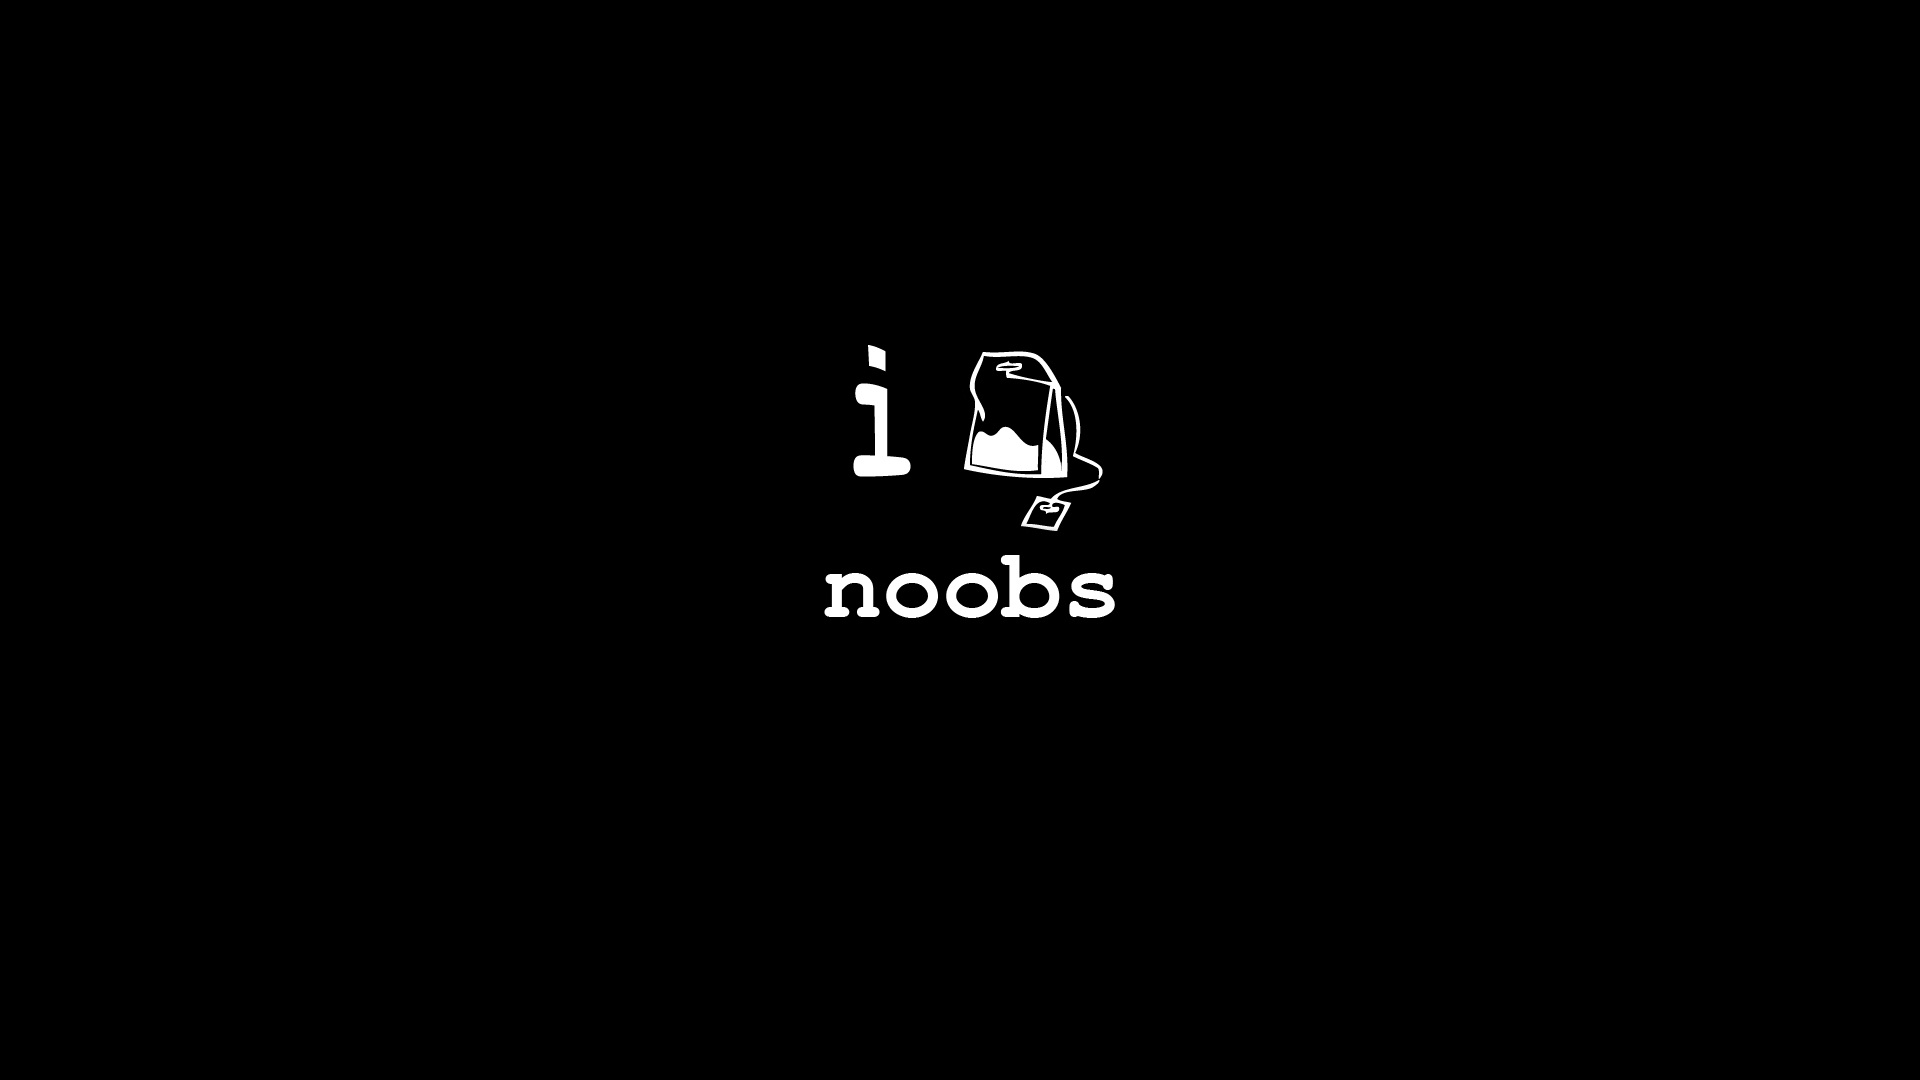 The Teabag Noobs Wallpaper iPhone